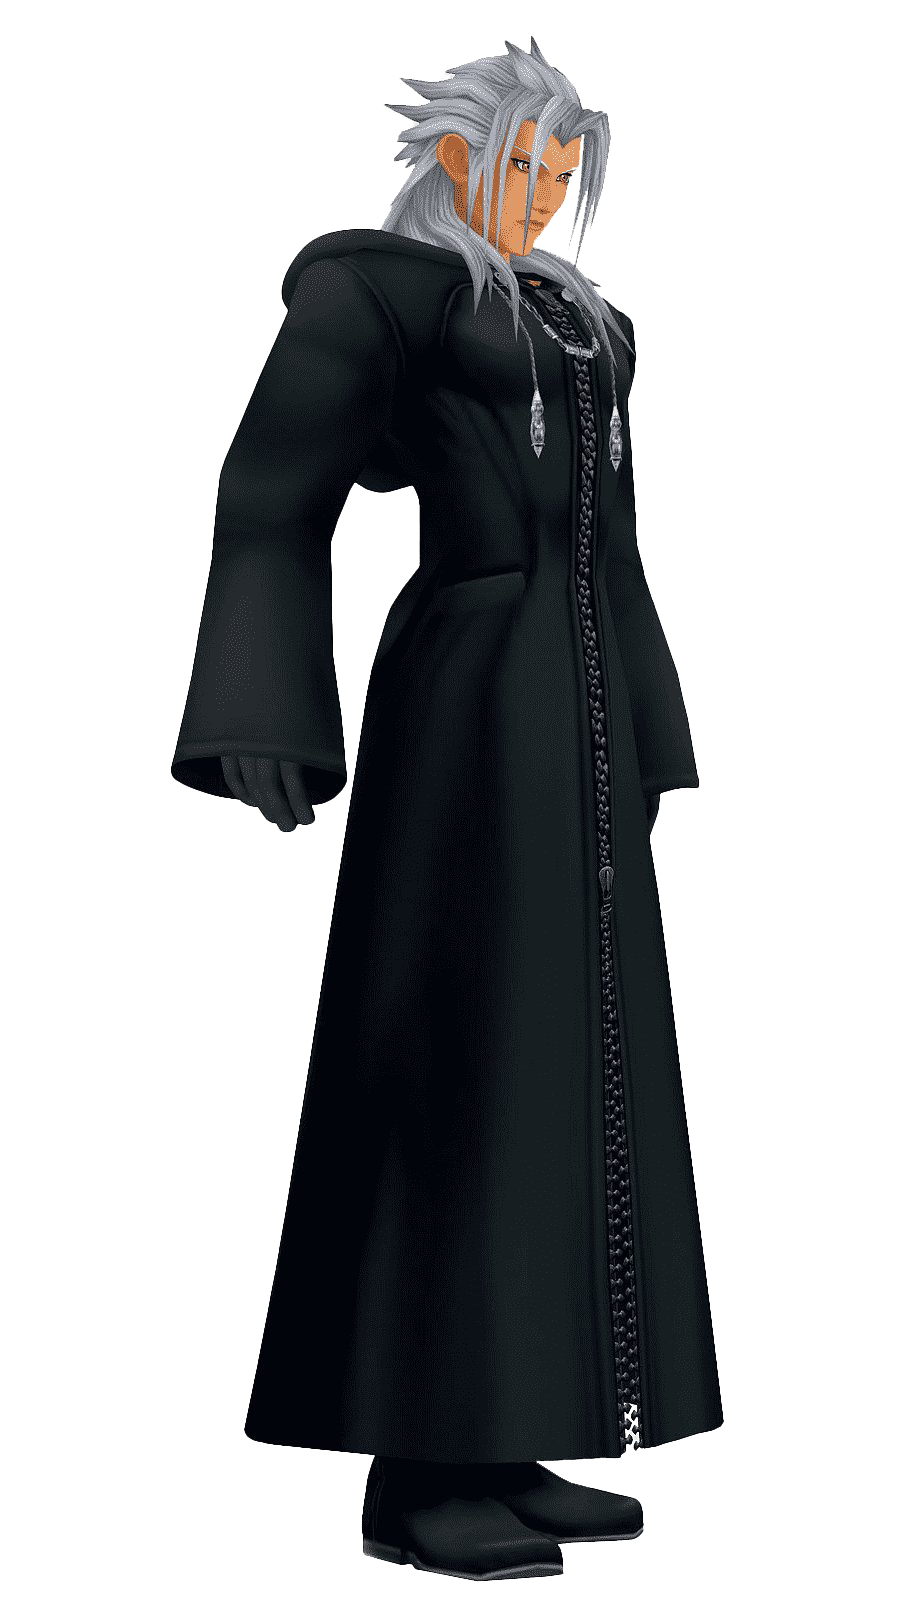 Kingdom Hearts Images Xiii Organization PNG Image